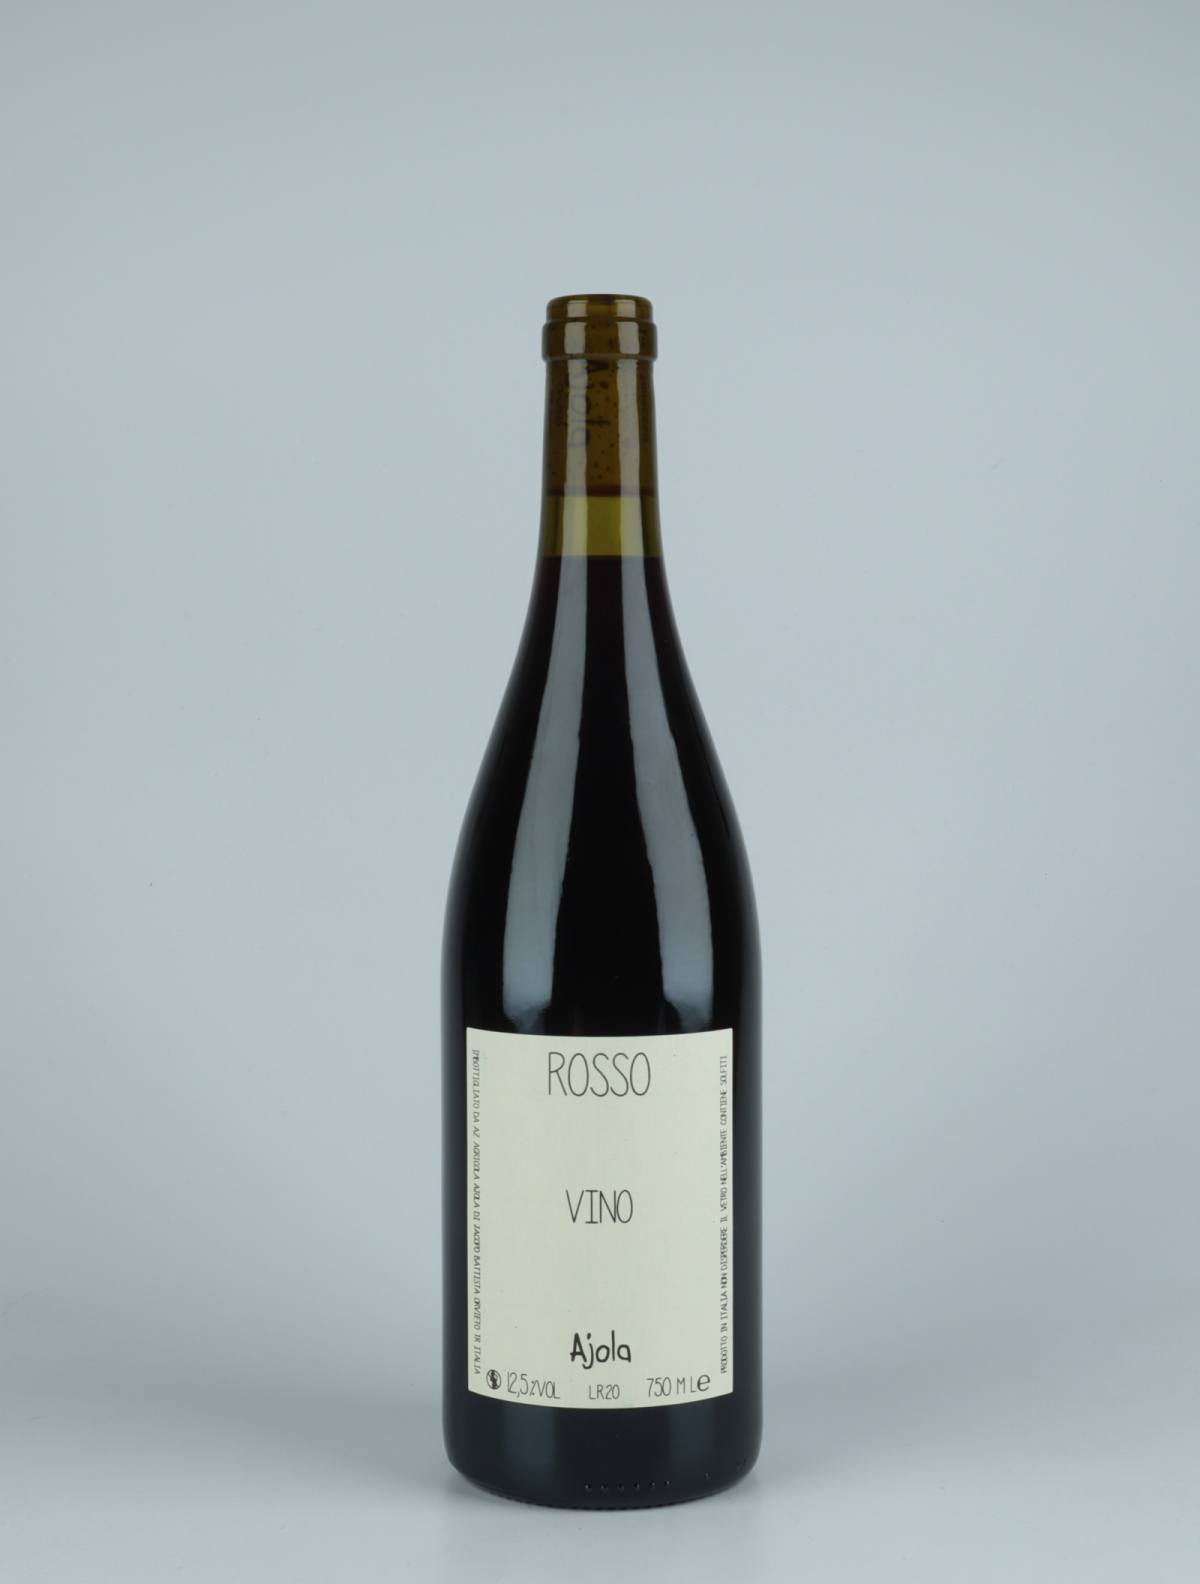 A bottle 2020 Vino Rosso Red wine from Ajola, Umbria in Italy